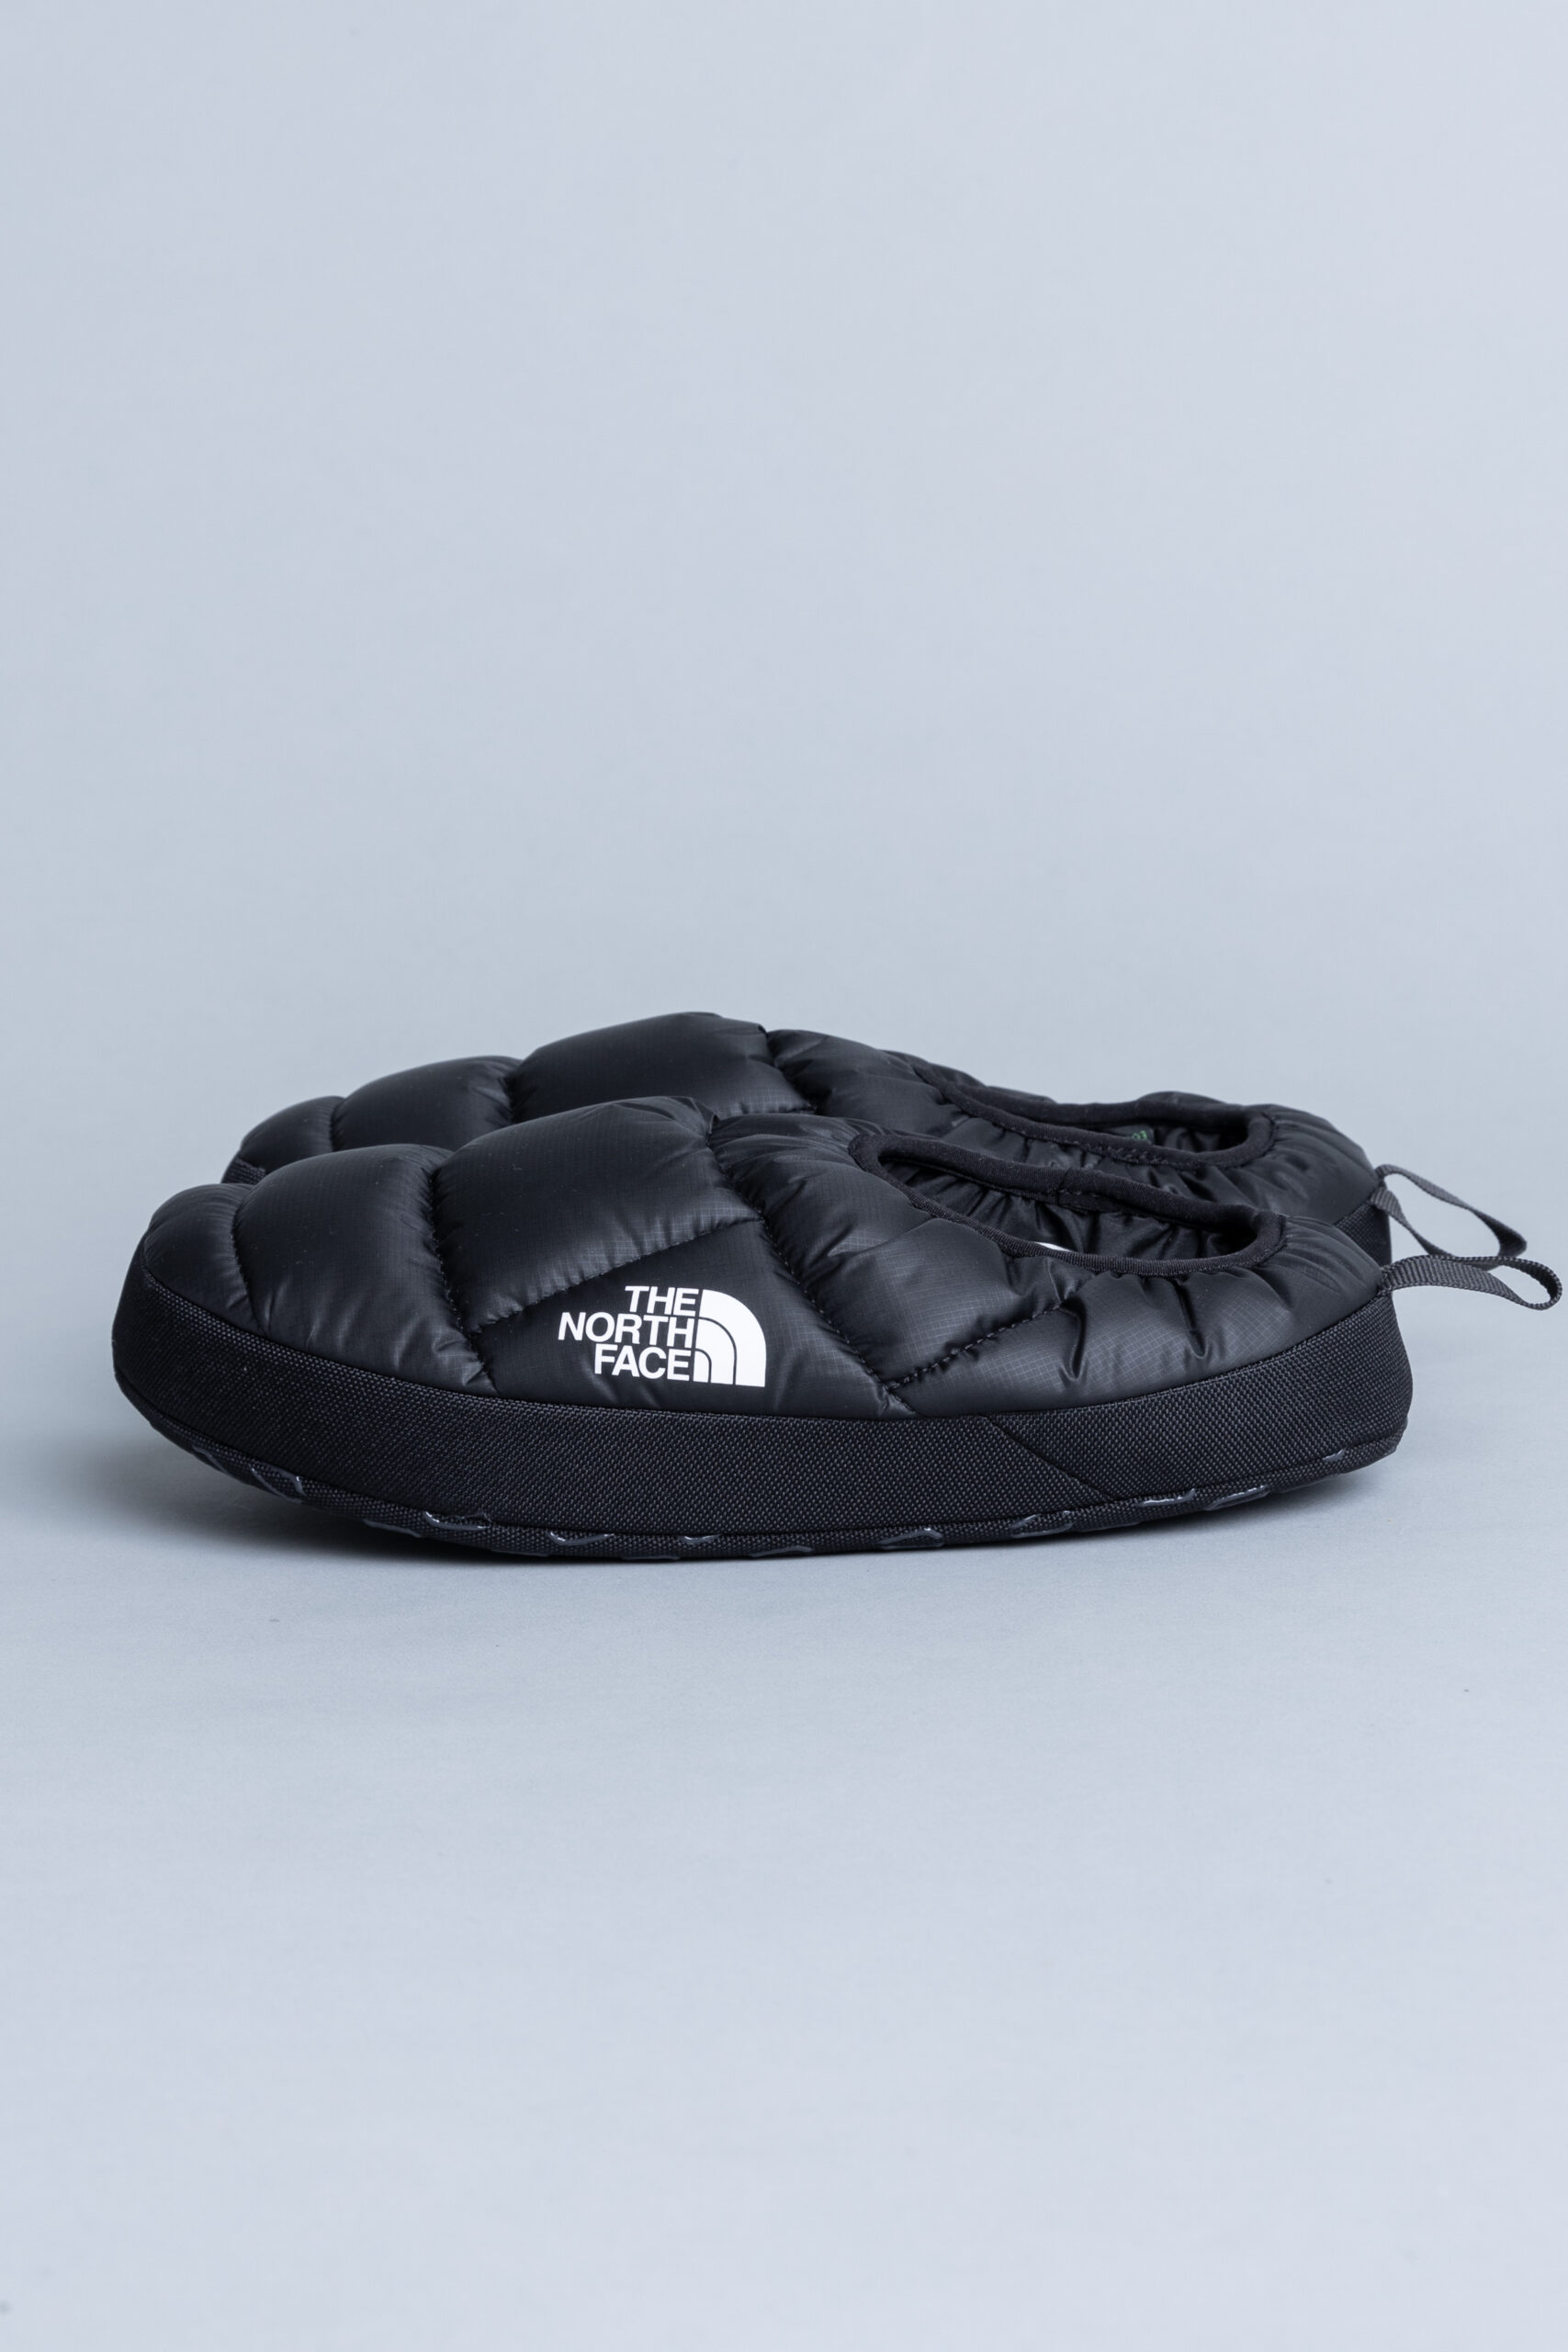 The North Face NSE Tent Mule III Black • Centreville Store